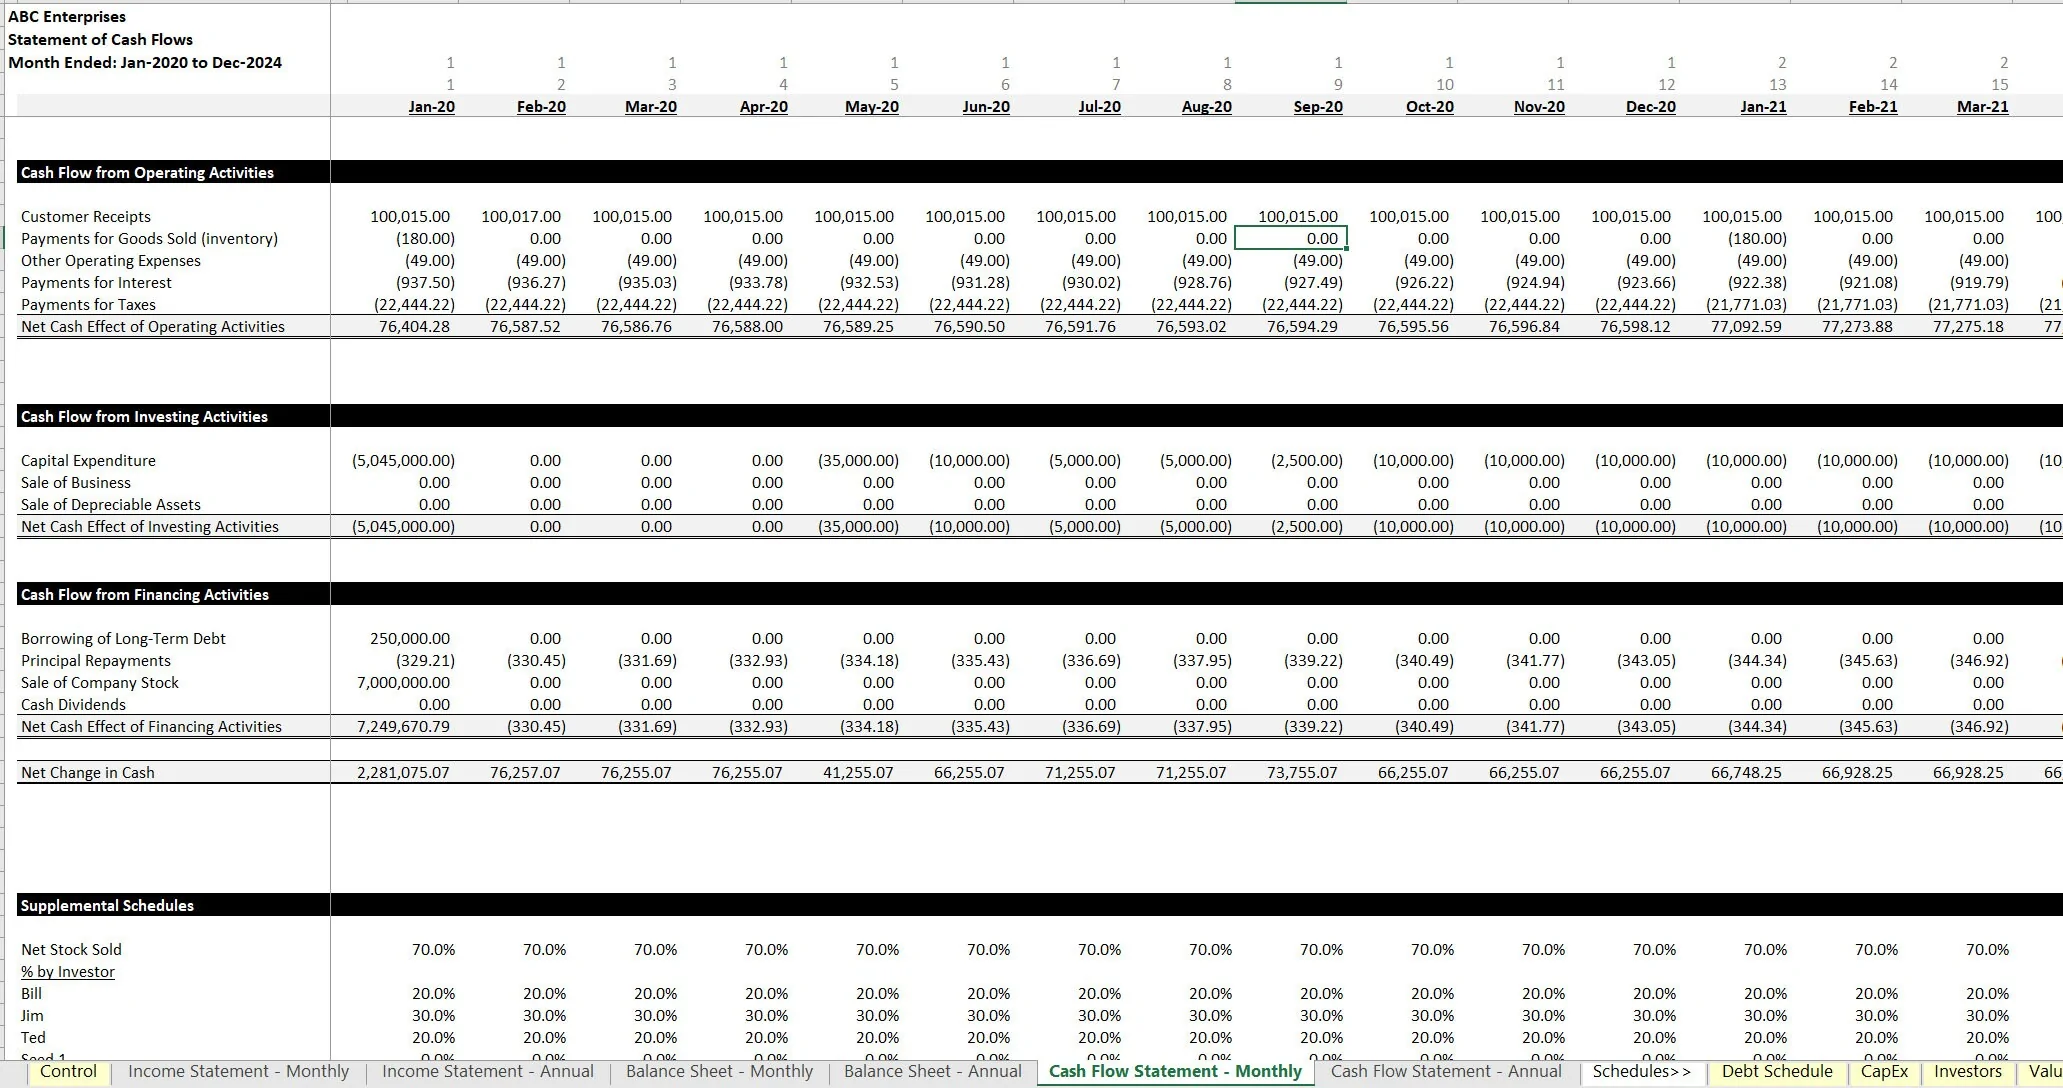 This is a partial preview of General Use 3-Statement Financial Model: 5-Year Startup (Excel workbook (XLSX)). 